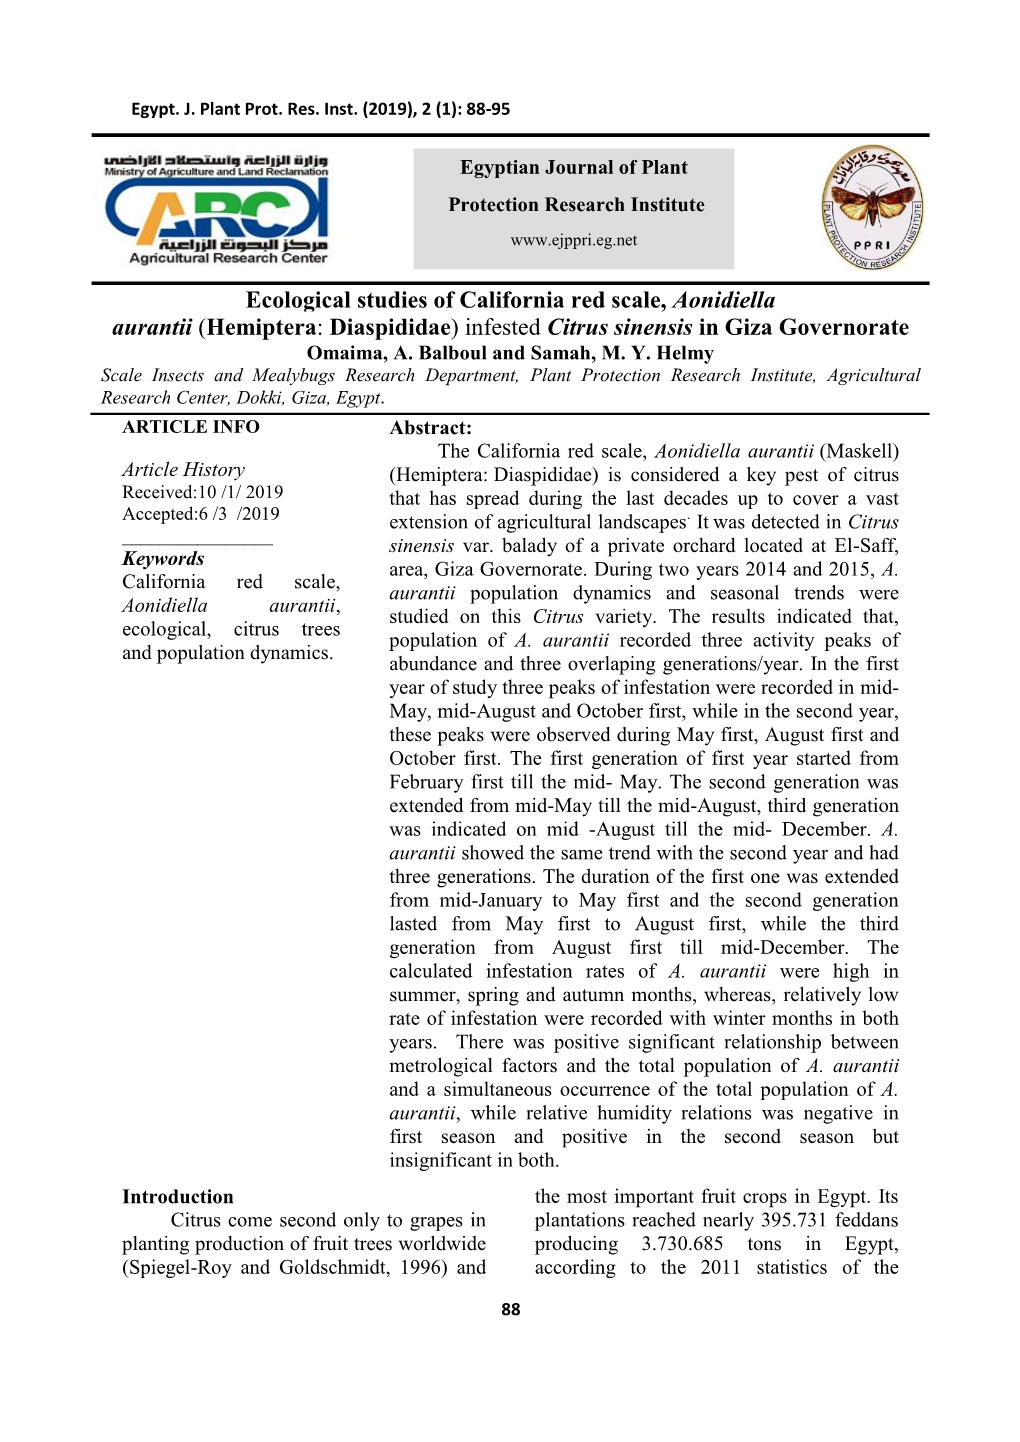 Ecological Studies of California Red Scale, Aonidiella Aurantii (Hemiptera: Diaspididae) Infested Citrus Sinensis in Giza Governorate Omaima, A